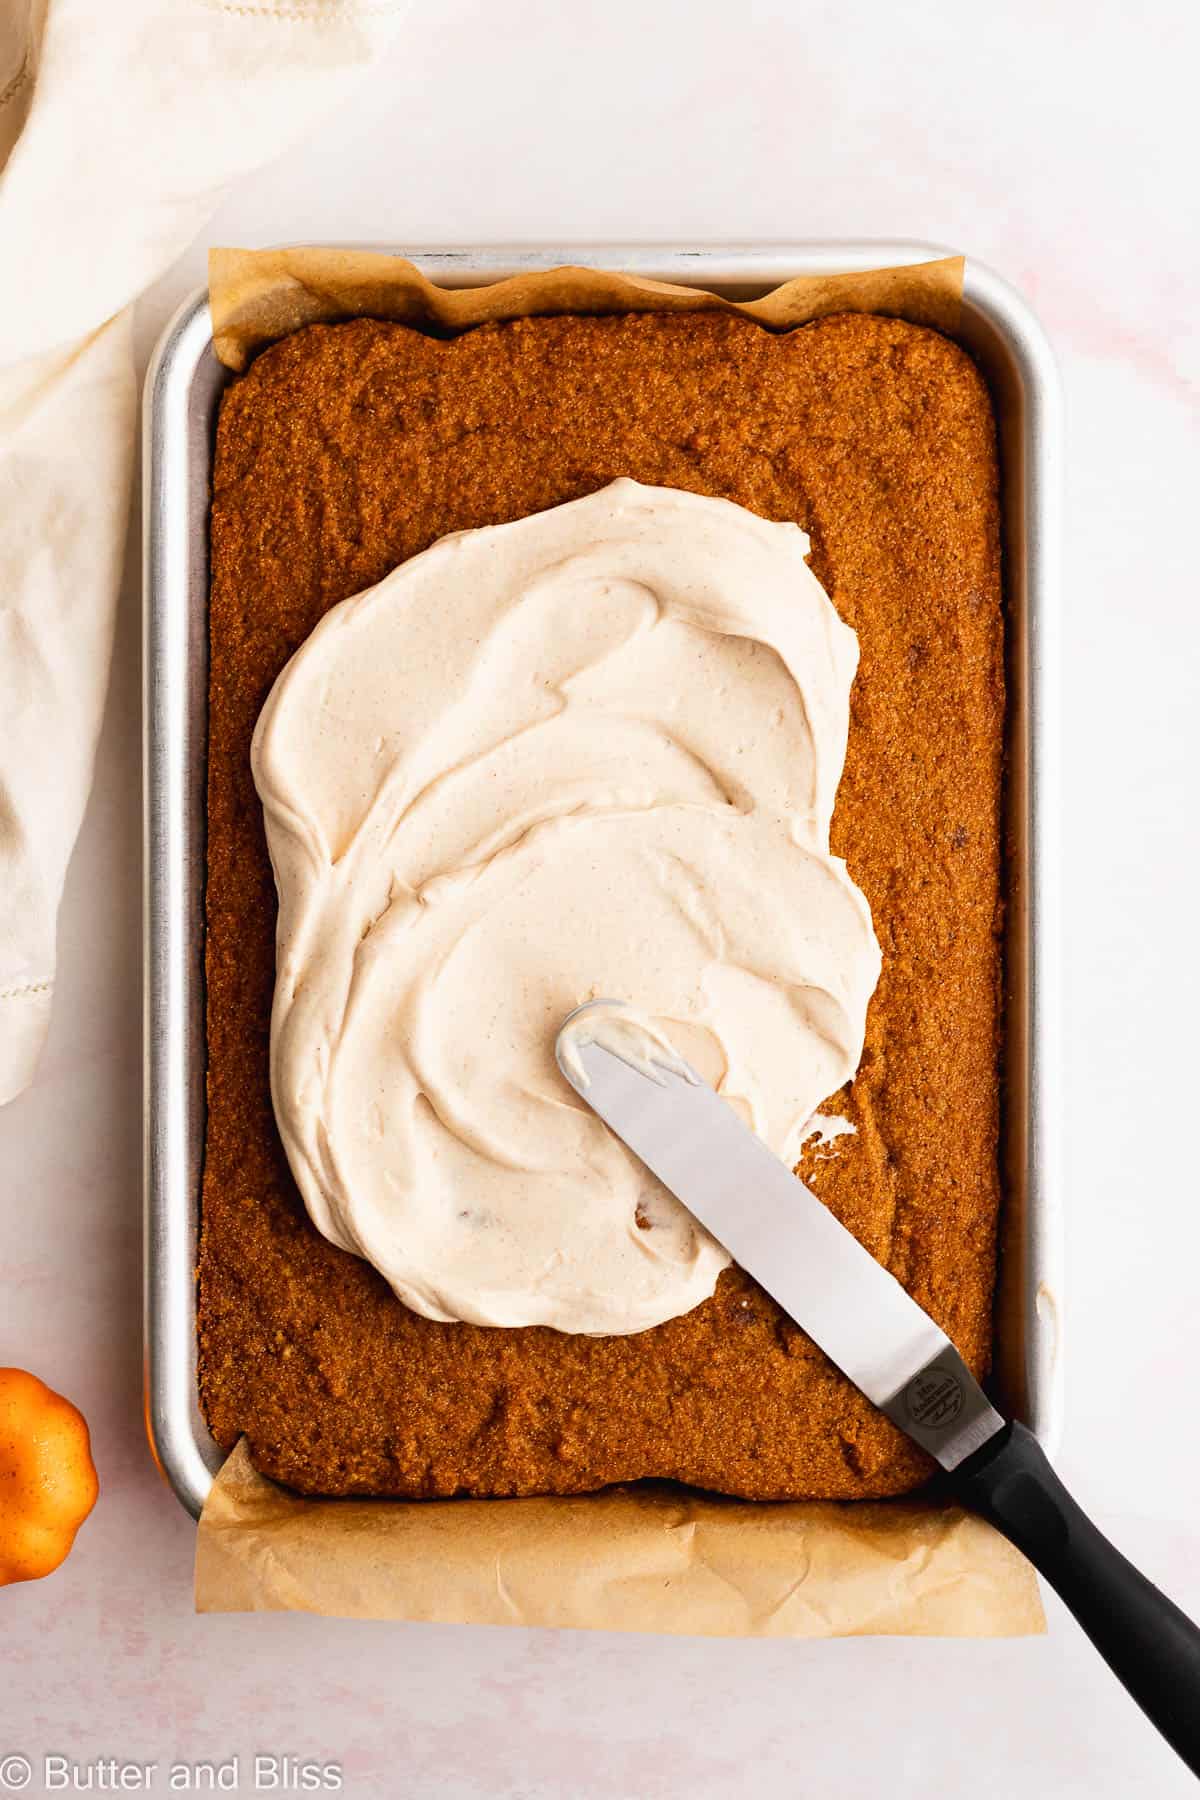 Fresh baked fall dessert in a baking pan covered in cream cheese frosting.